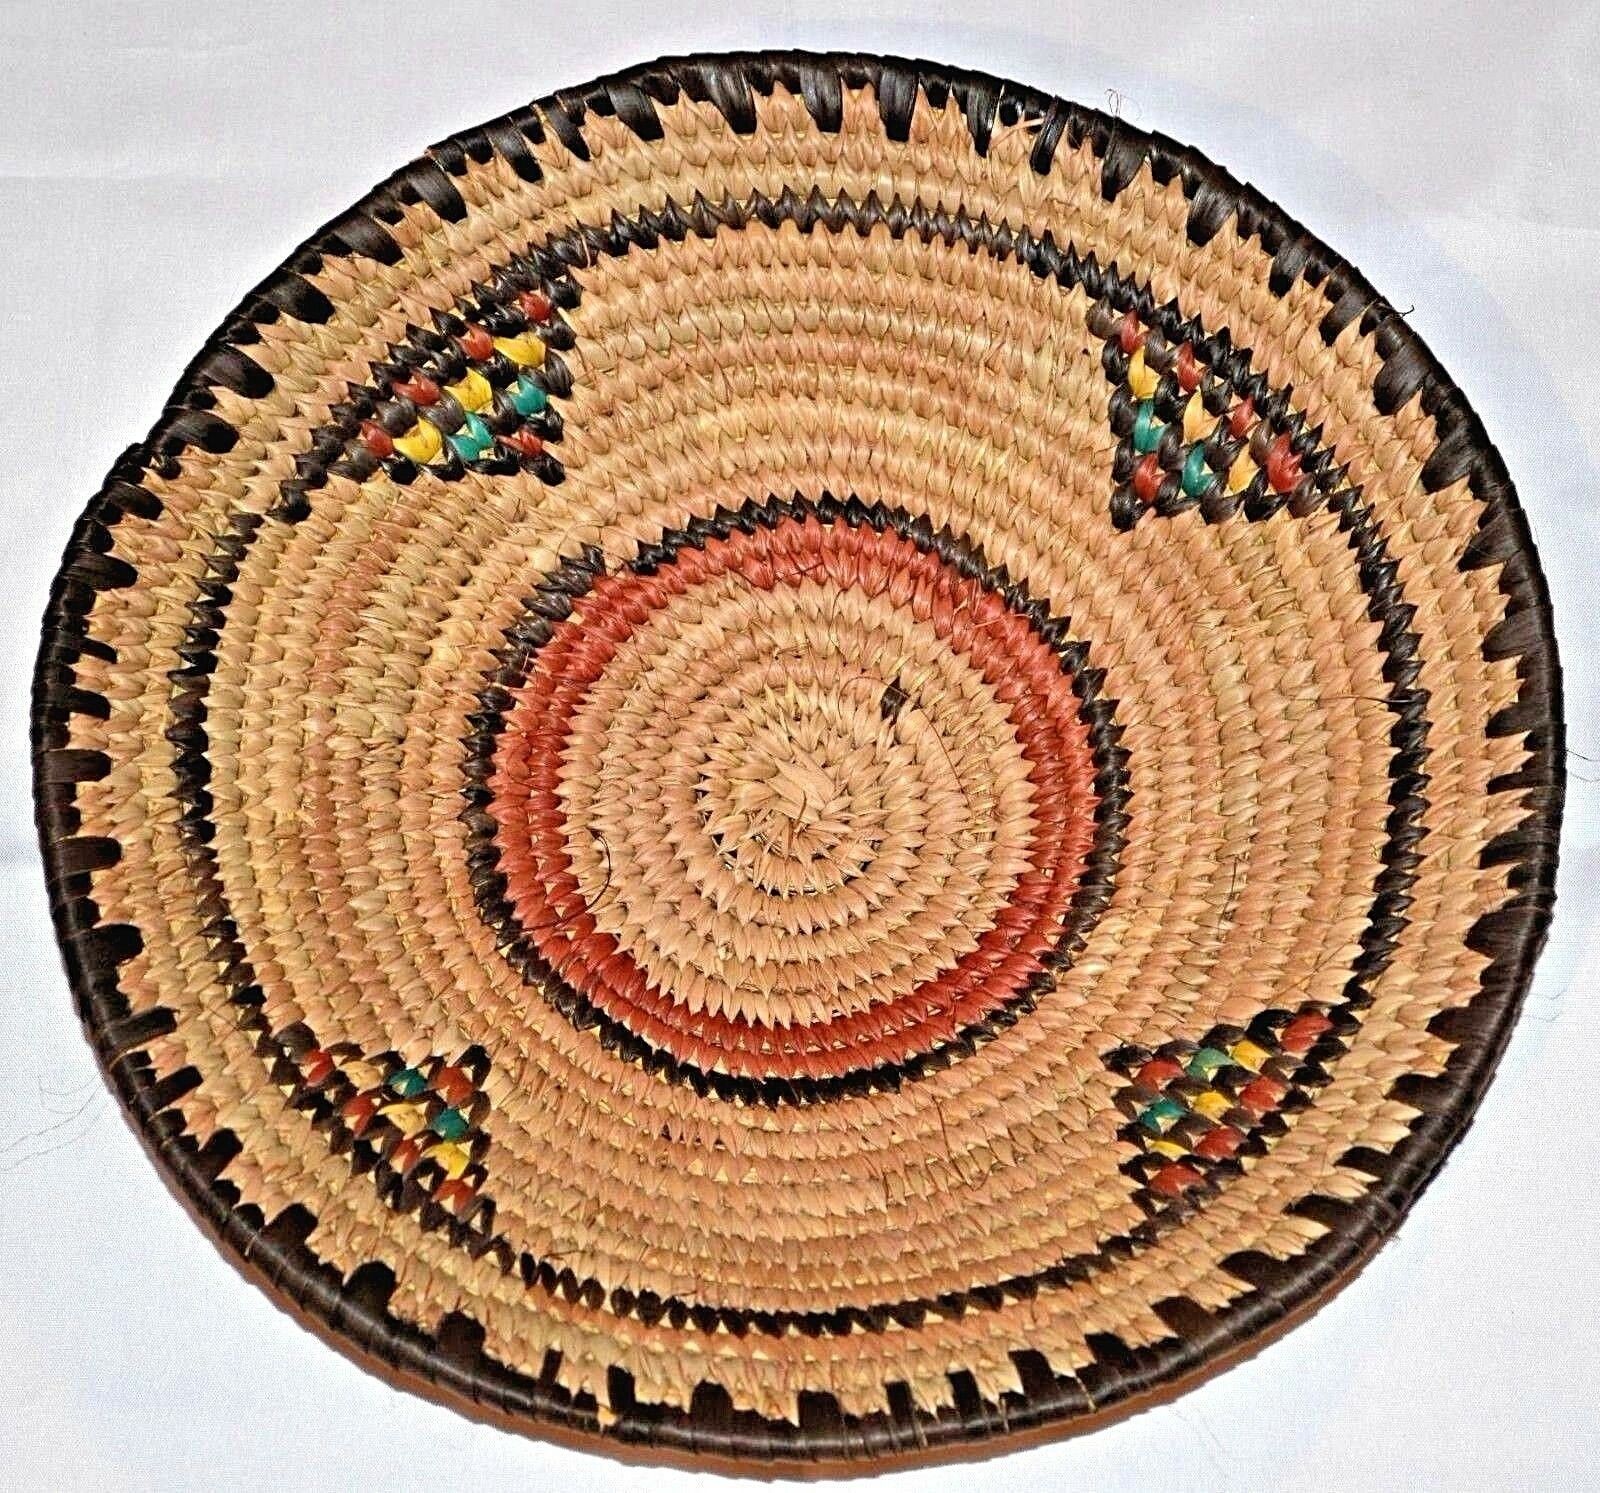 African Hausa Tribal People Woven Coil Traditional Savanna Grass Basket, Nigeria